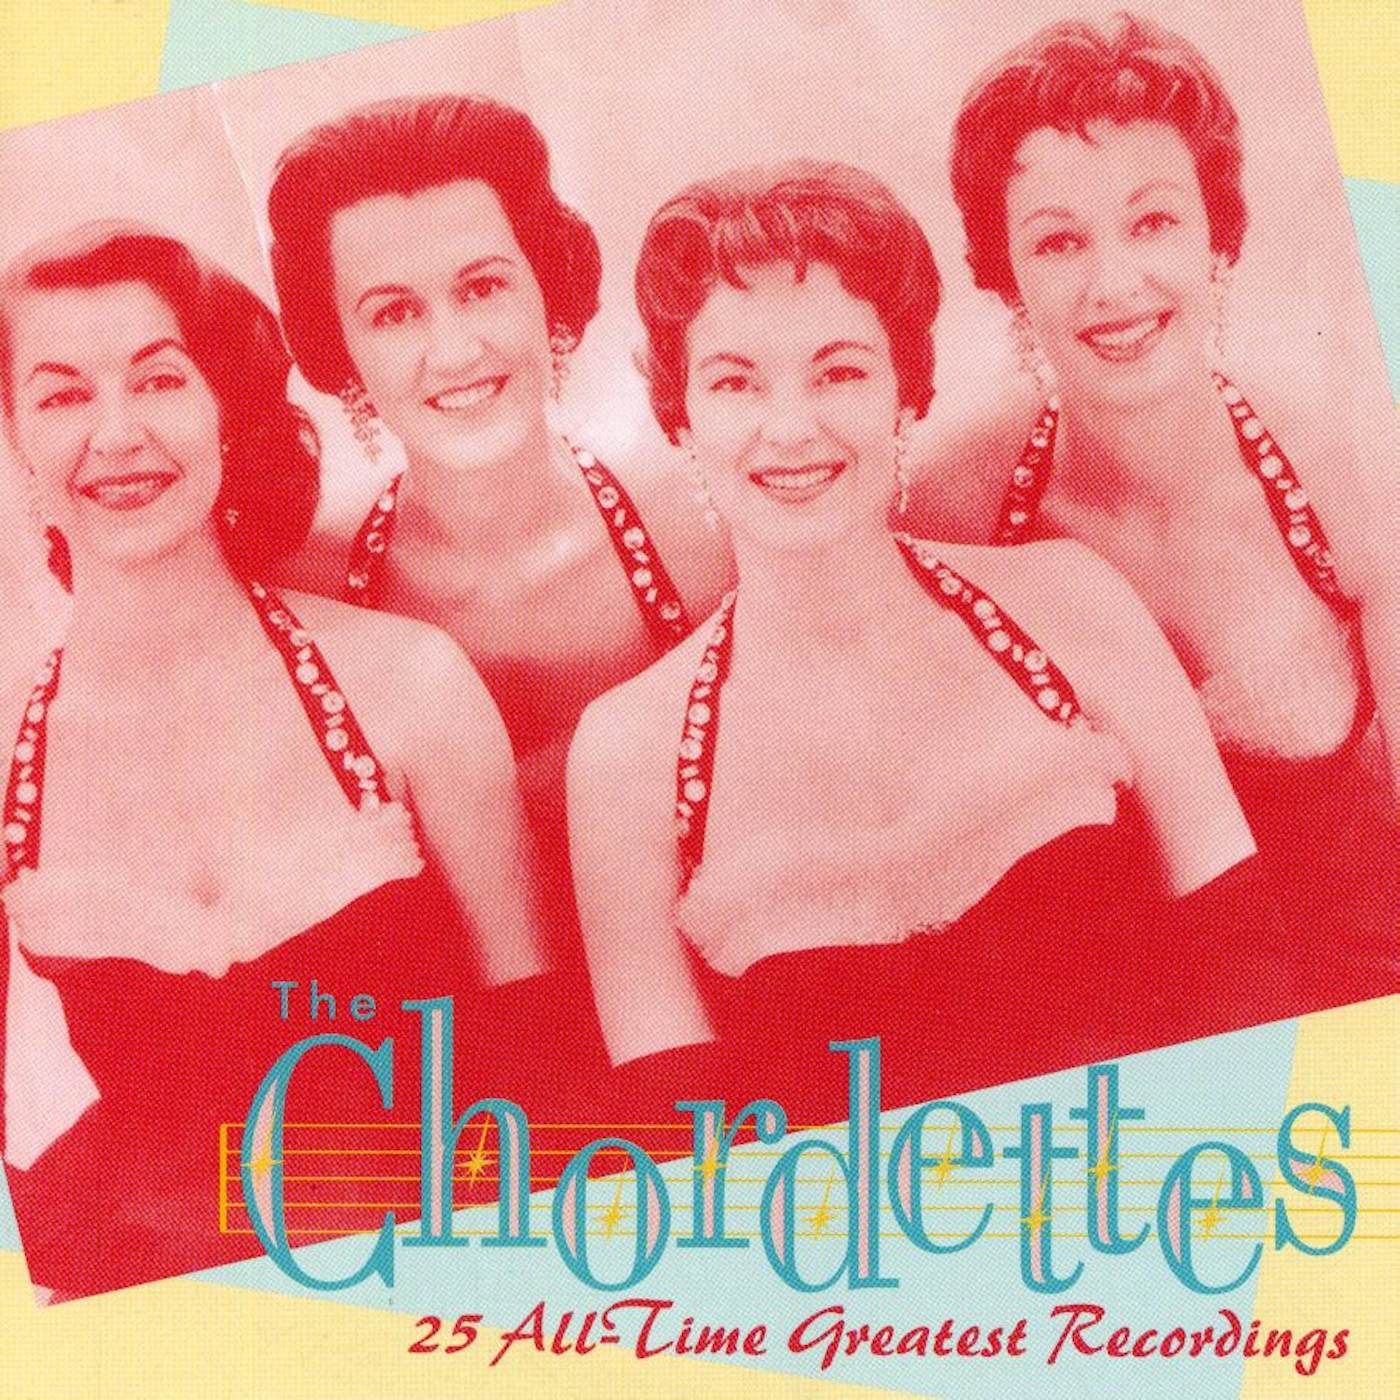 The Chordettes 25 ALL-TIME GREATEST RECORDINGS CD